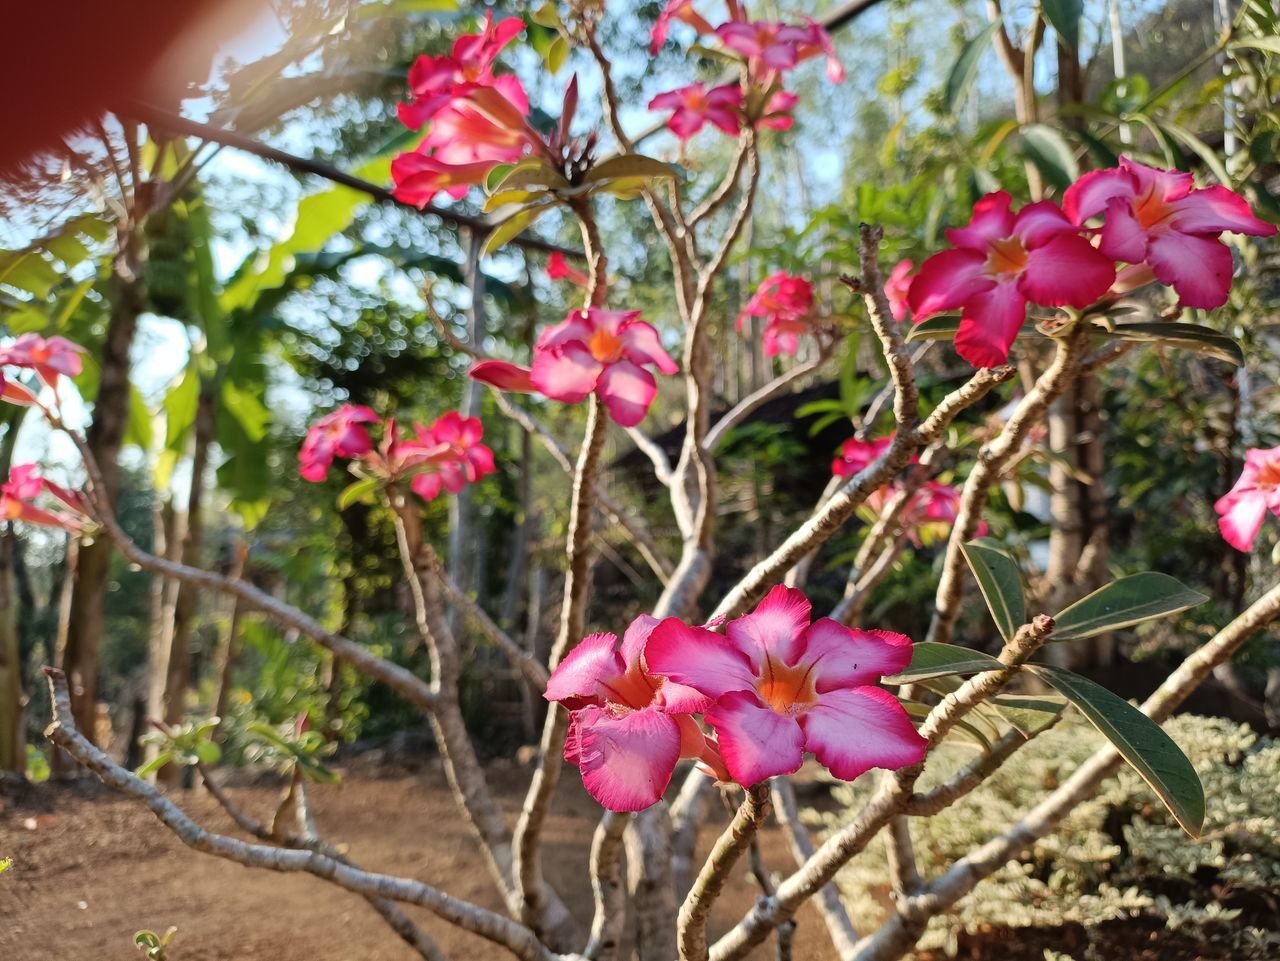 plant, flower, flowering plant, pink, beauty in nature, freshness, nature, growth, tree, close-up, no people, fragility, petal, blossom, day, outdoors, focus on foreground, garden, plant part, leaf, springtime, botany, branch, inflorescence, flower head, red, shrub, sunlight